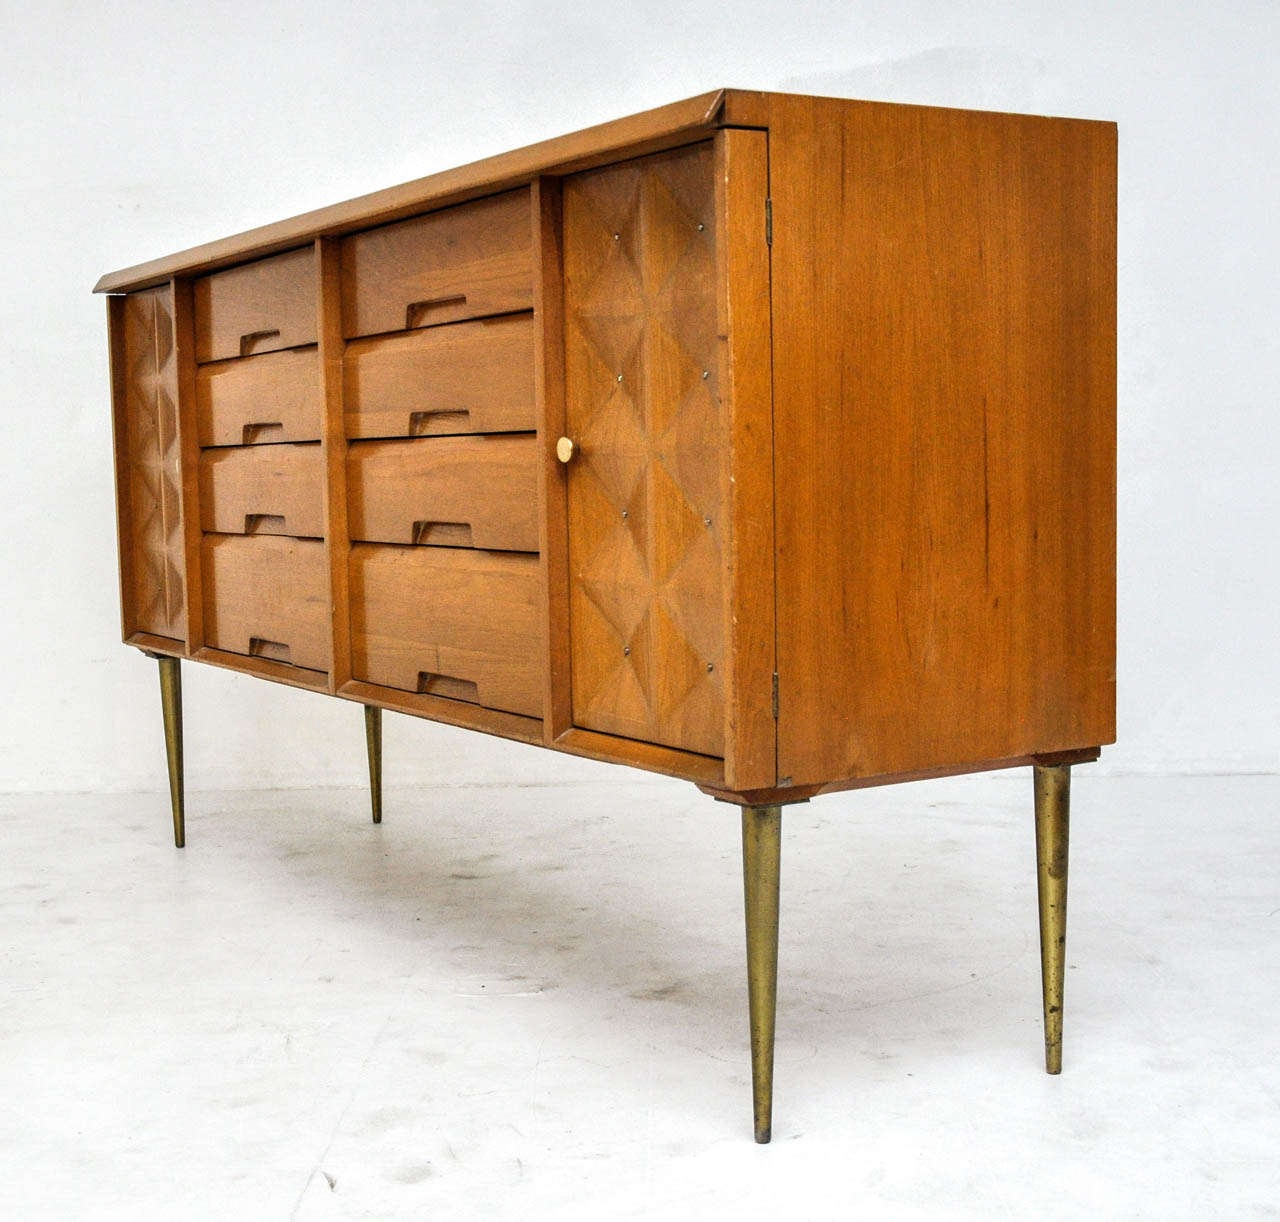 Birch sideboard by Salvatore Bevelacqua for Alliance Furniture, circa 1954. Sculpted door fronts with brass details and brass legs.

Matching highboy dresser available.